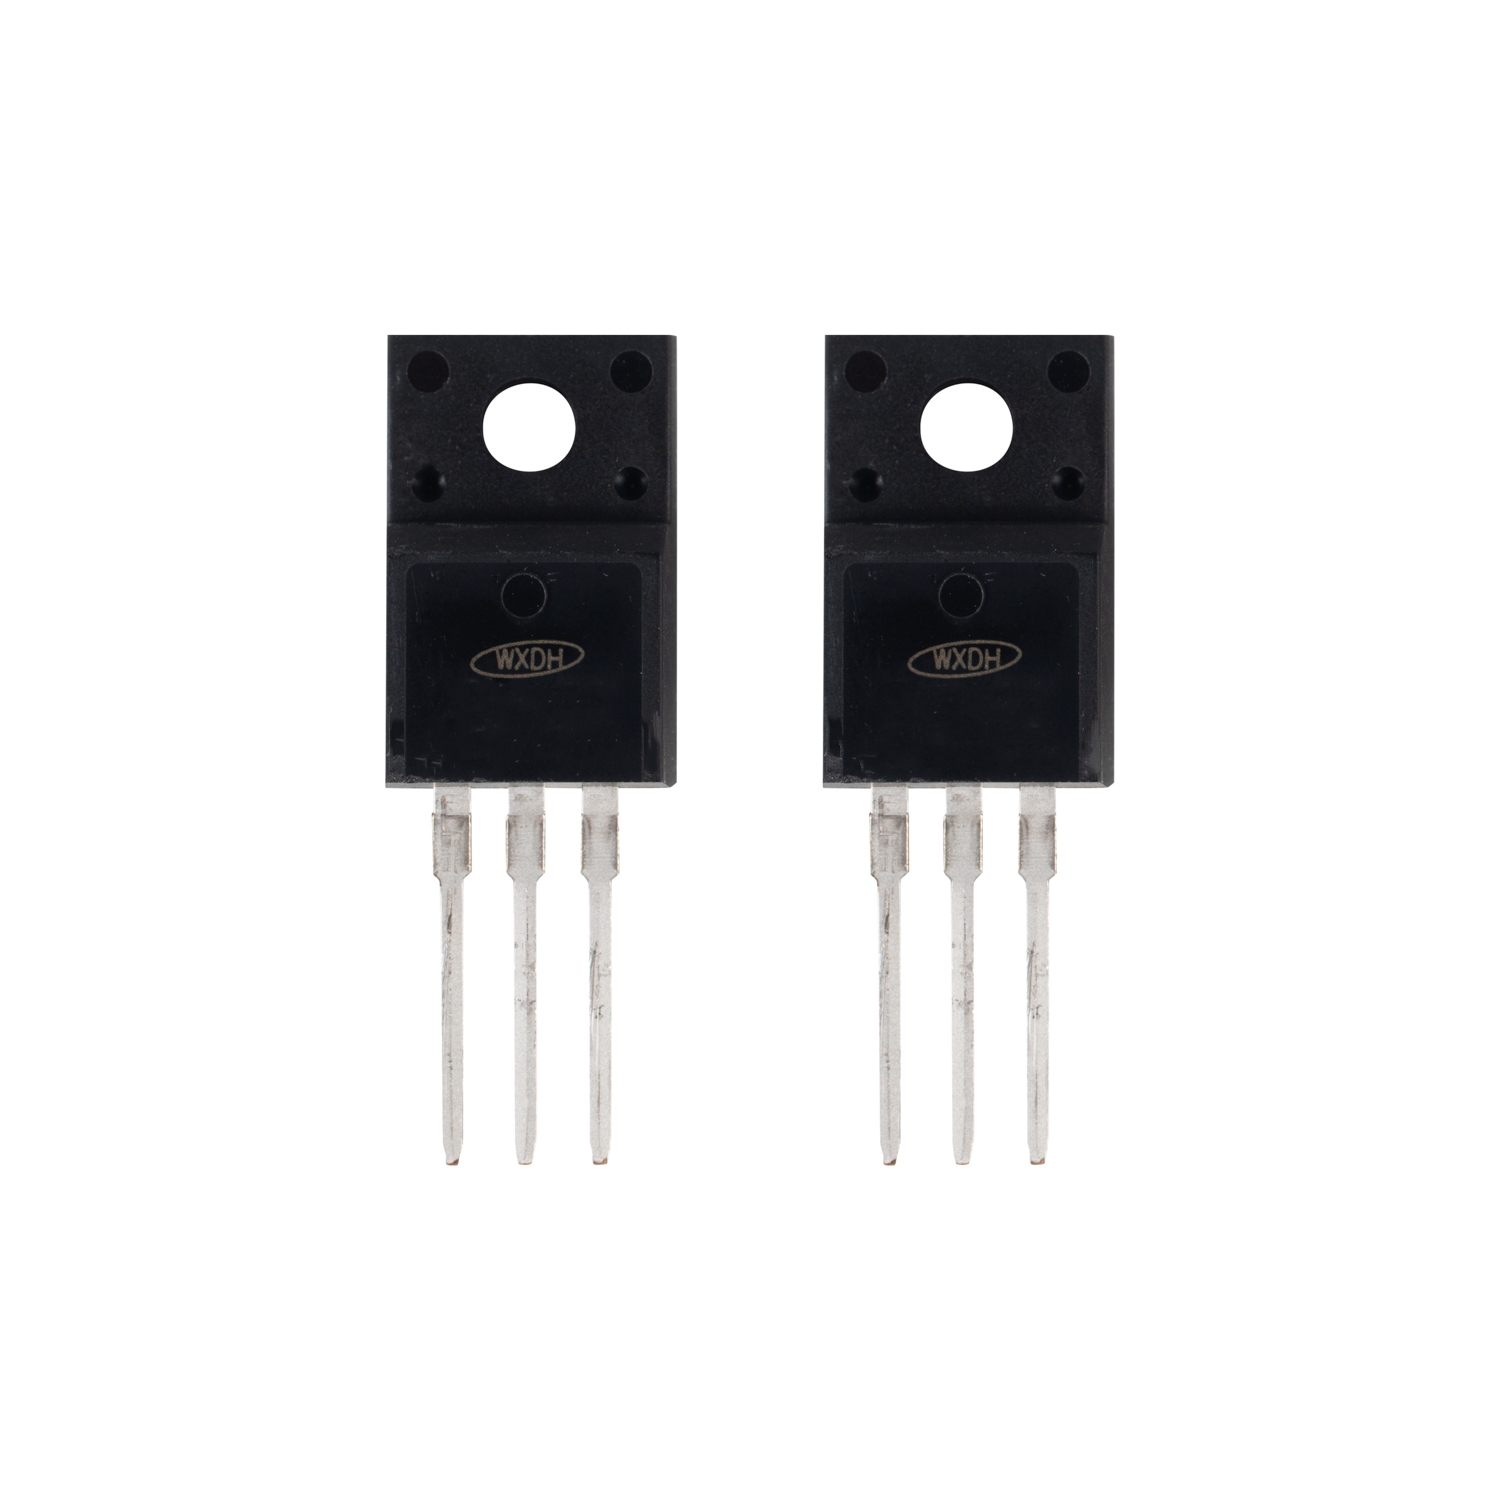 0.8A 600V N-channel Enhancement Mode Power MOSFET